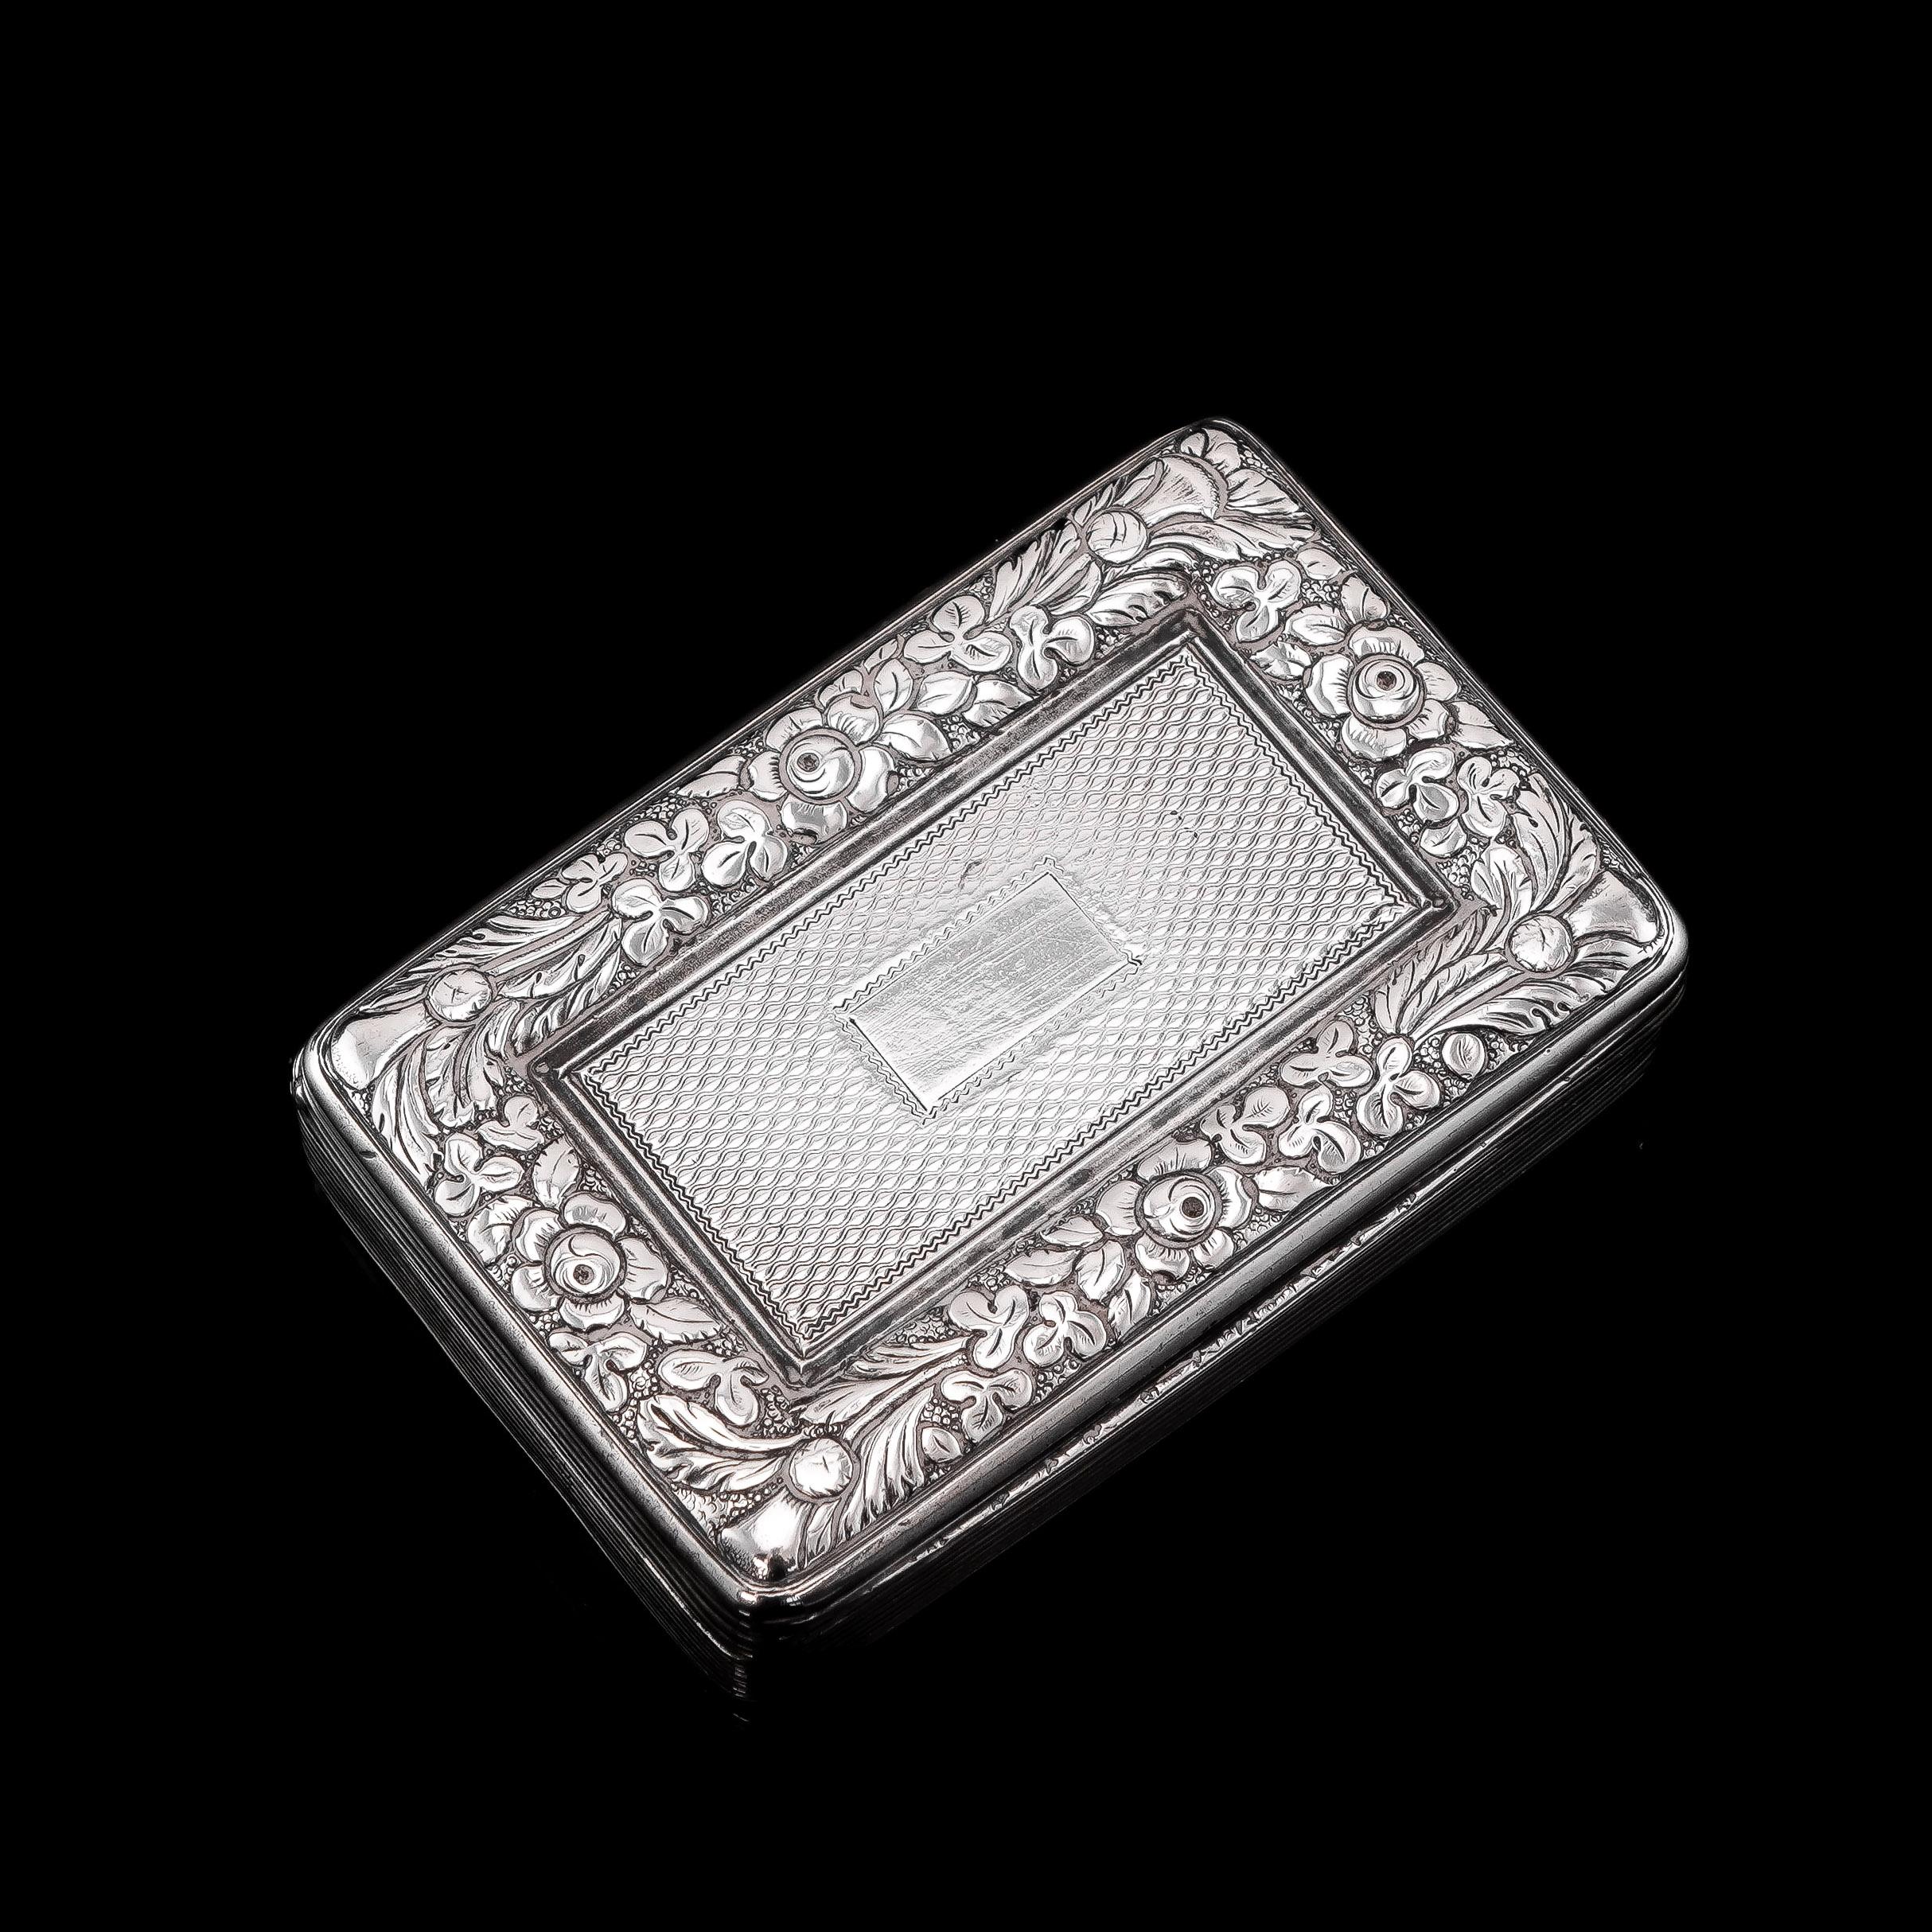 We are delighted to offer this Georgian solid silver pocket snuff box with the marks of Thomas Wilkes Barker, London 1824.
 
Classically Georgian in design, this pocket snuff box features lovely reede lines and engine-turned motifs on the base and